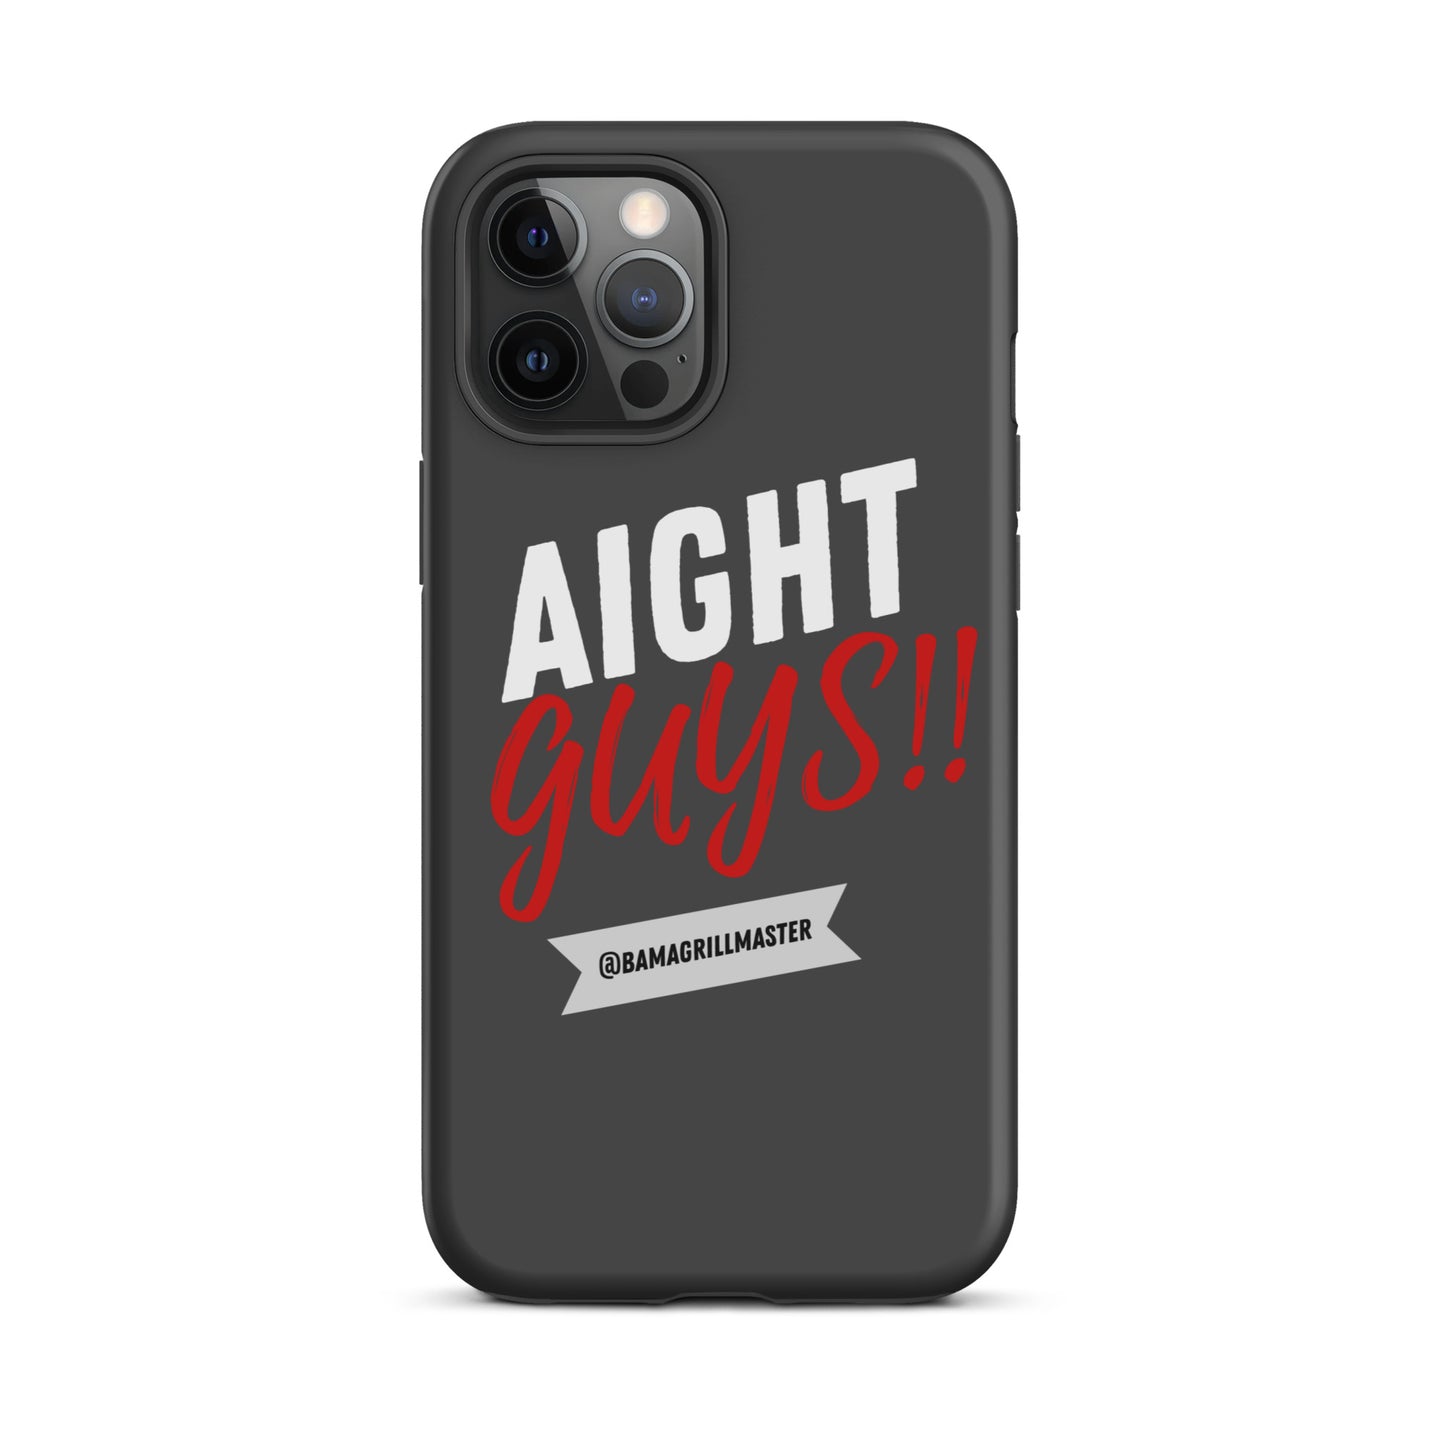 "Aight Guys!!" iPhone® Case